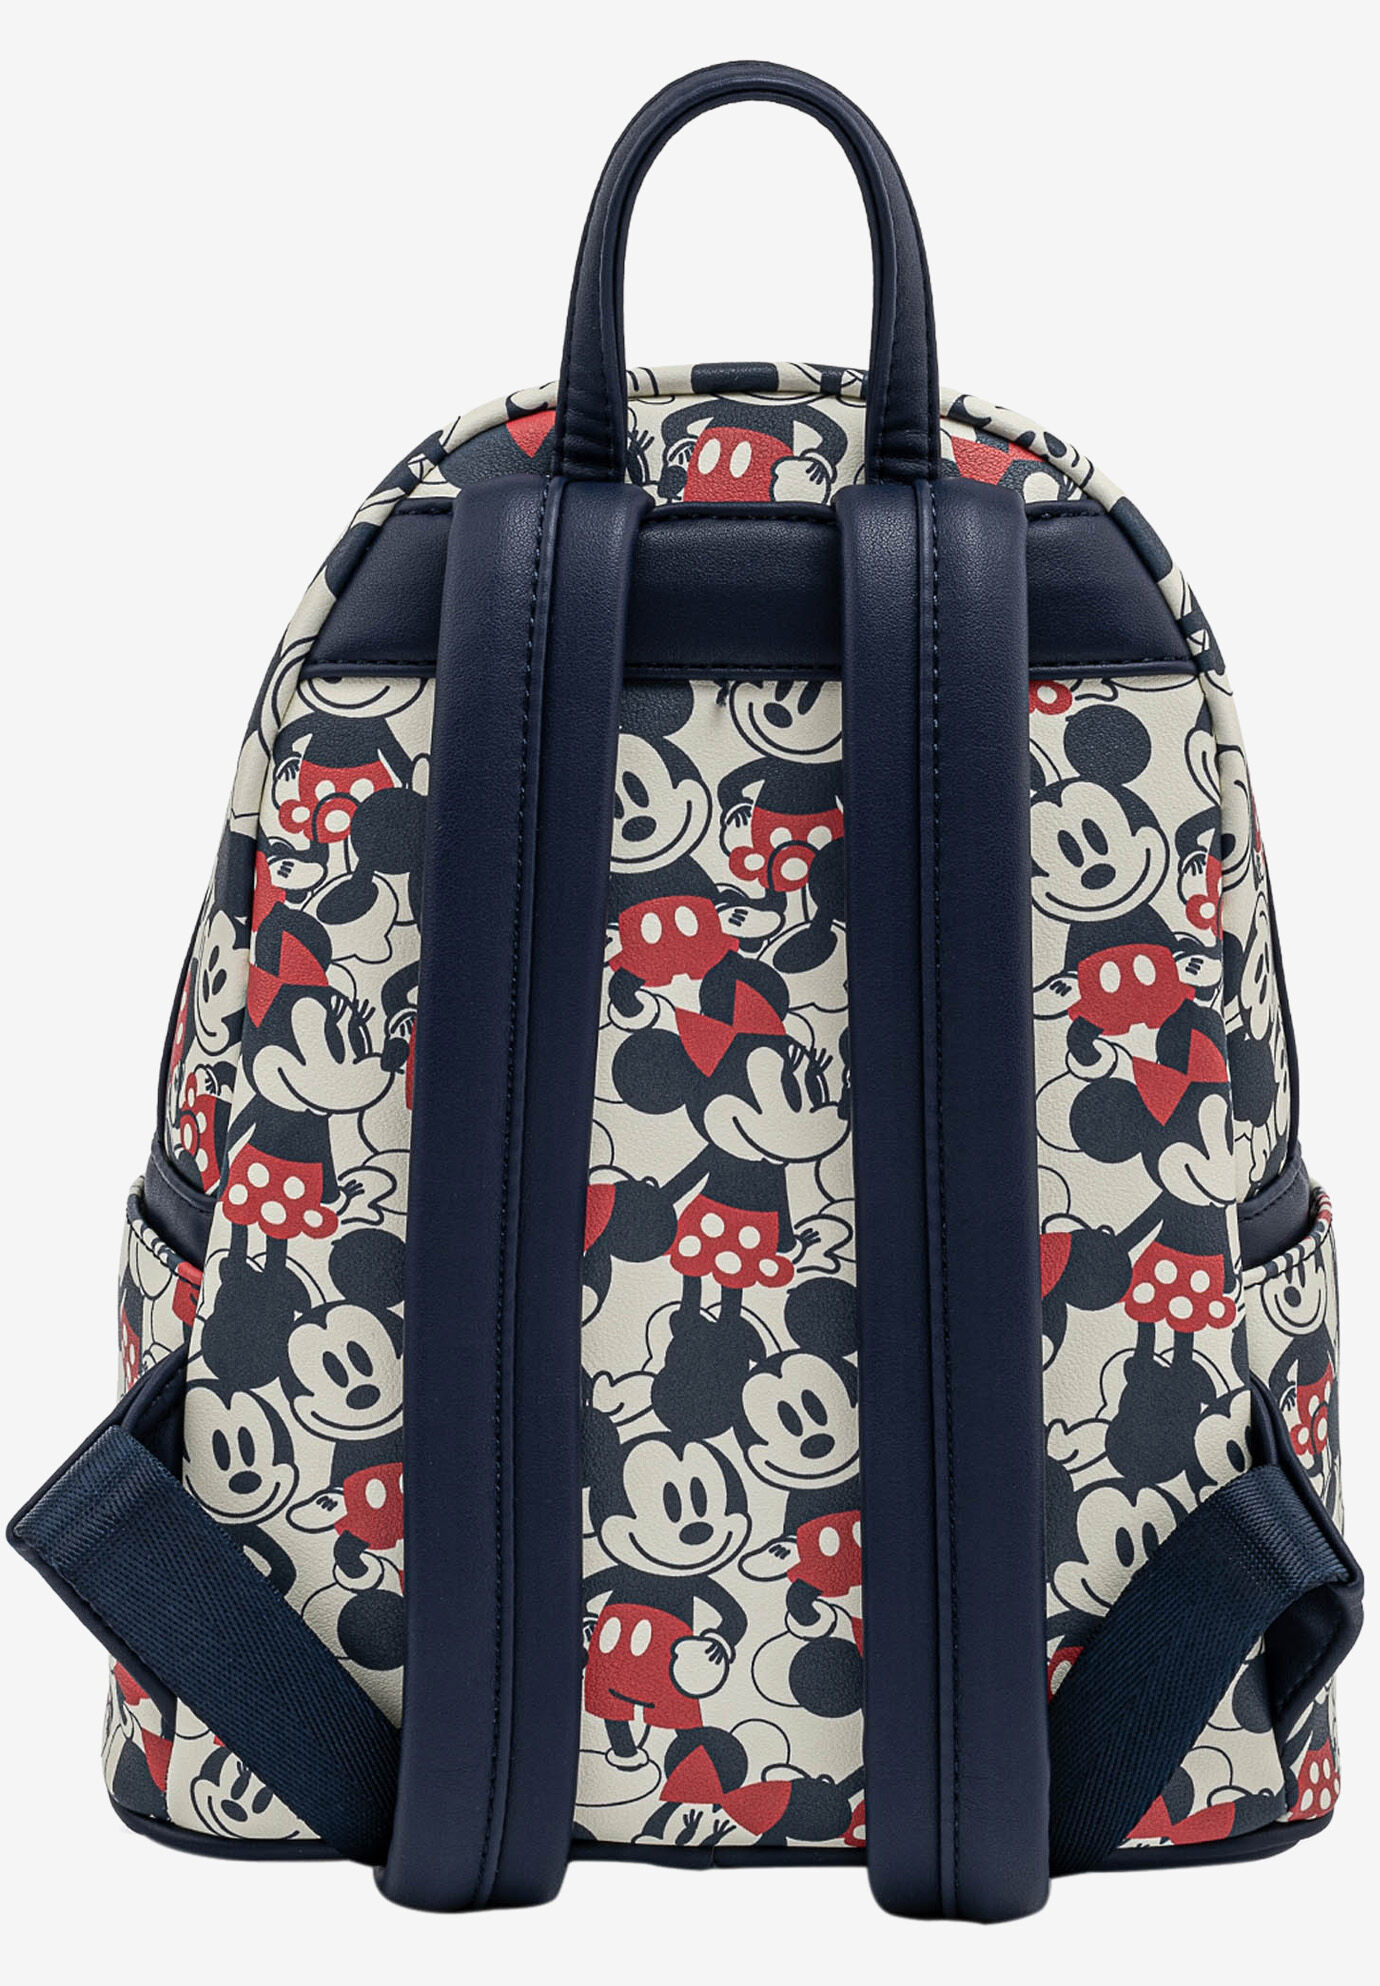 Minnie Mouse Allover Bookbag Backpack - Minnie Mouse Allover School Bag -  Backpack for Boys, Girls, Kids, Adults, Light Pink, One Size : Amazon.in:  Fashion